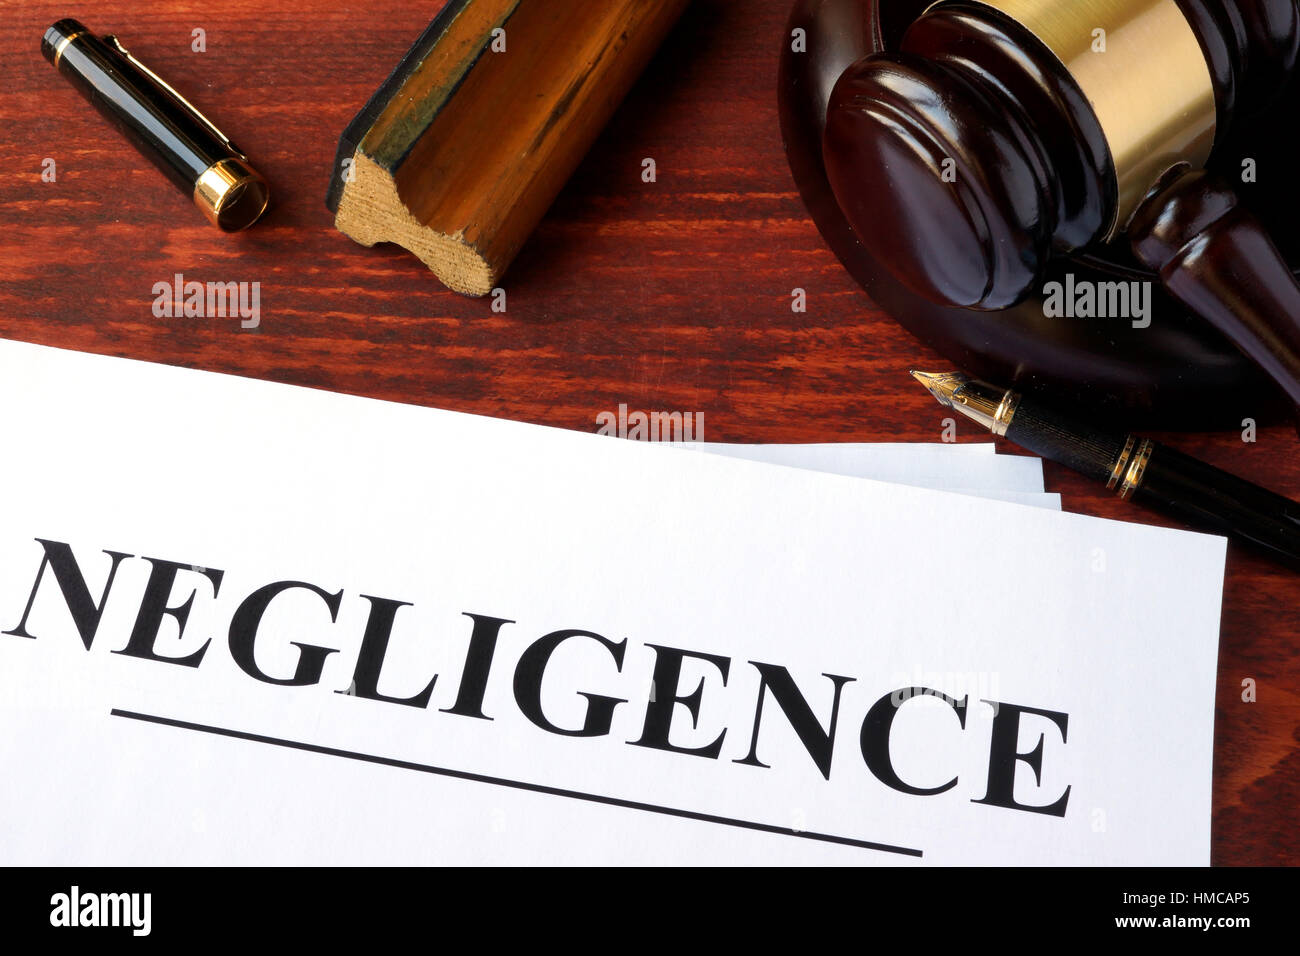 Negligence form, documents and gavel on a table. Stock Photo